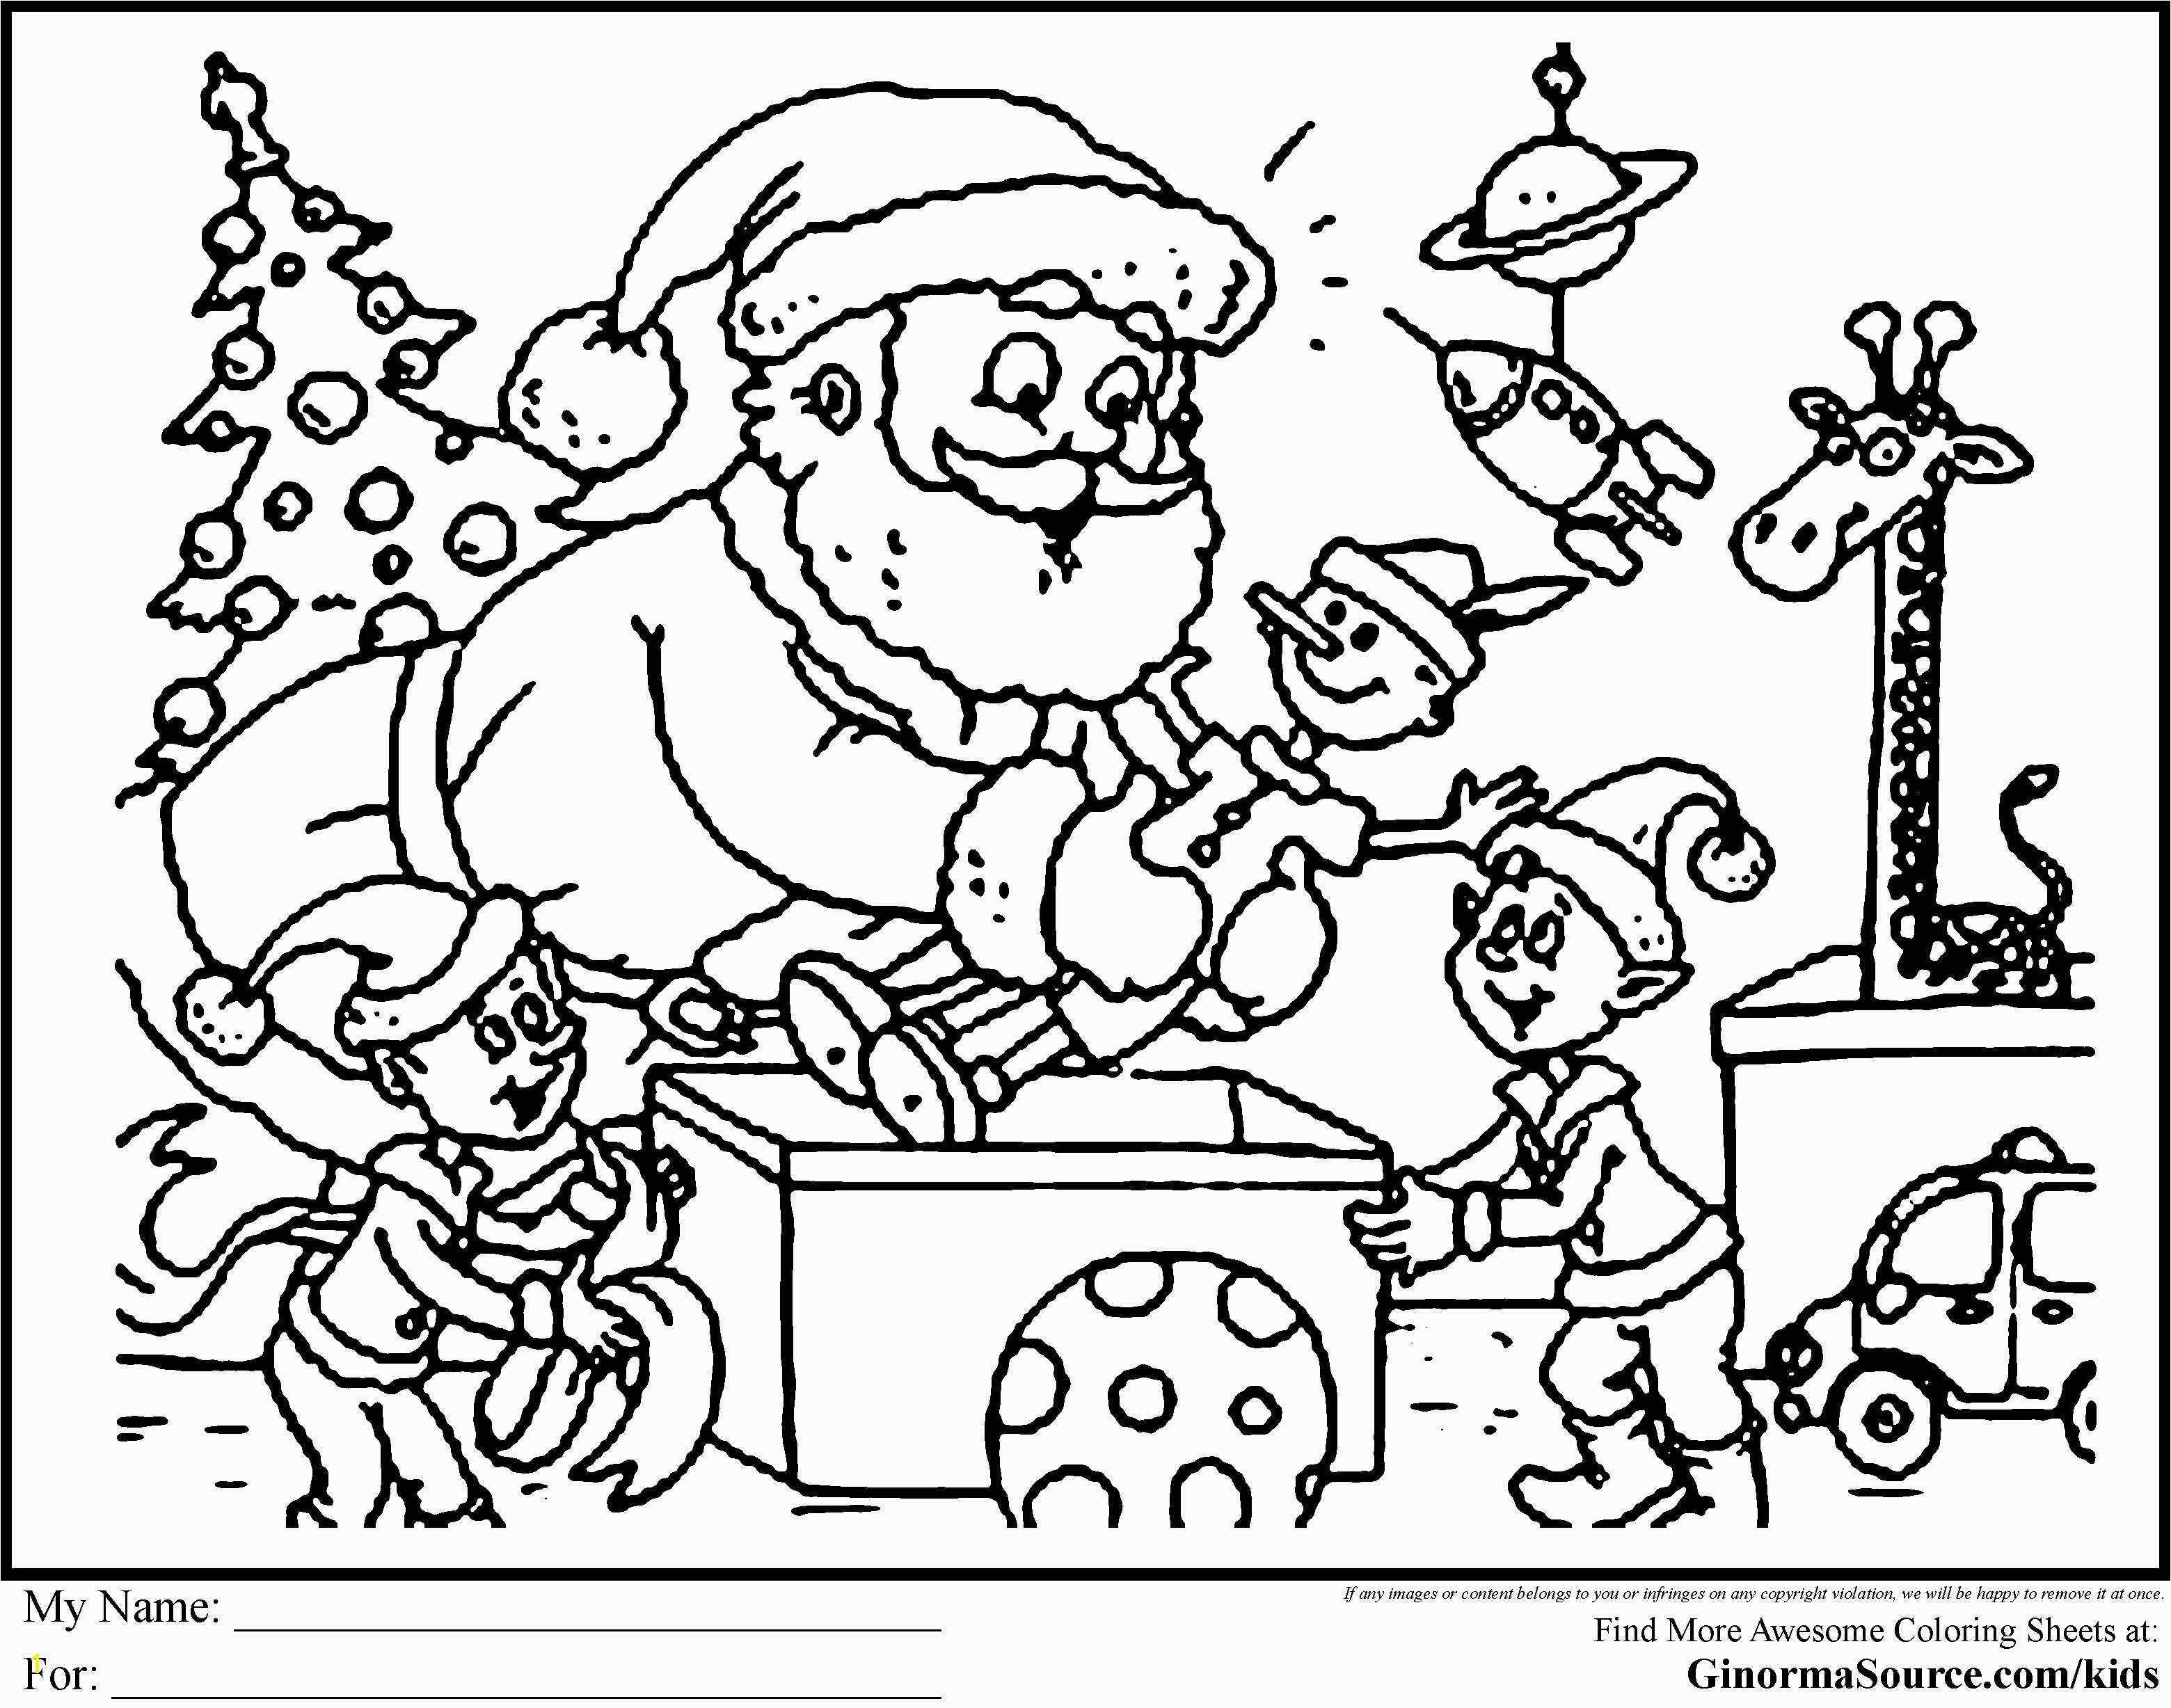 Coloring Pages Angry Birds Angry Birds Birthday Coloring Pages New Coloring Pages for Print